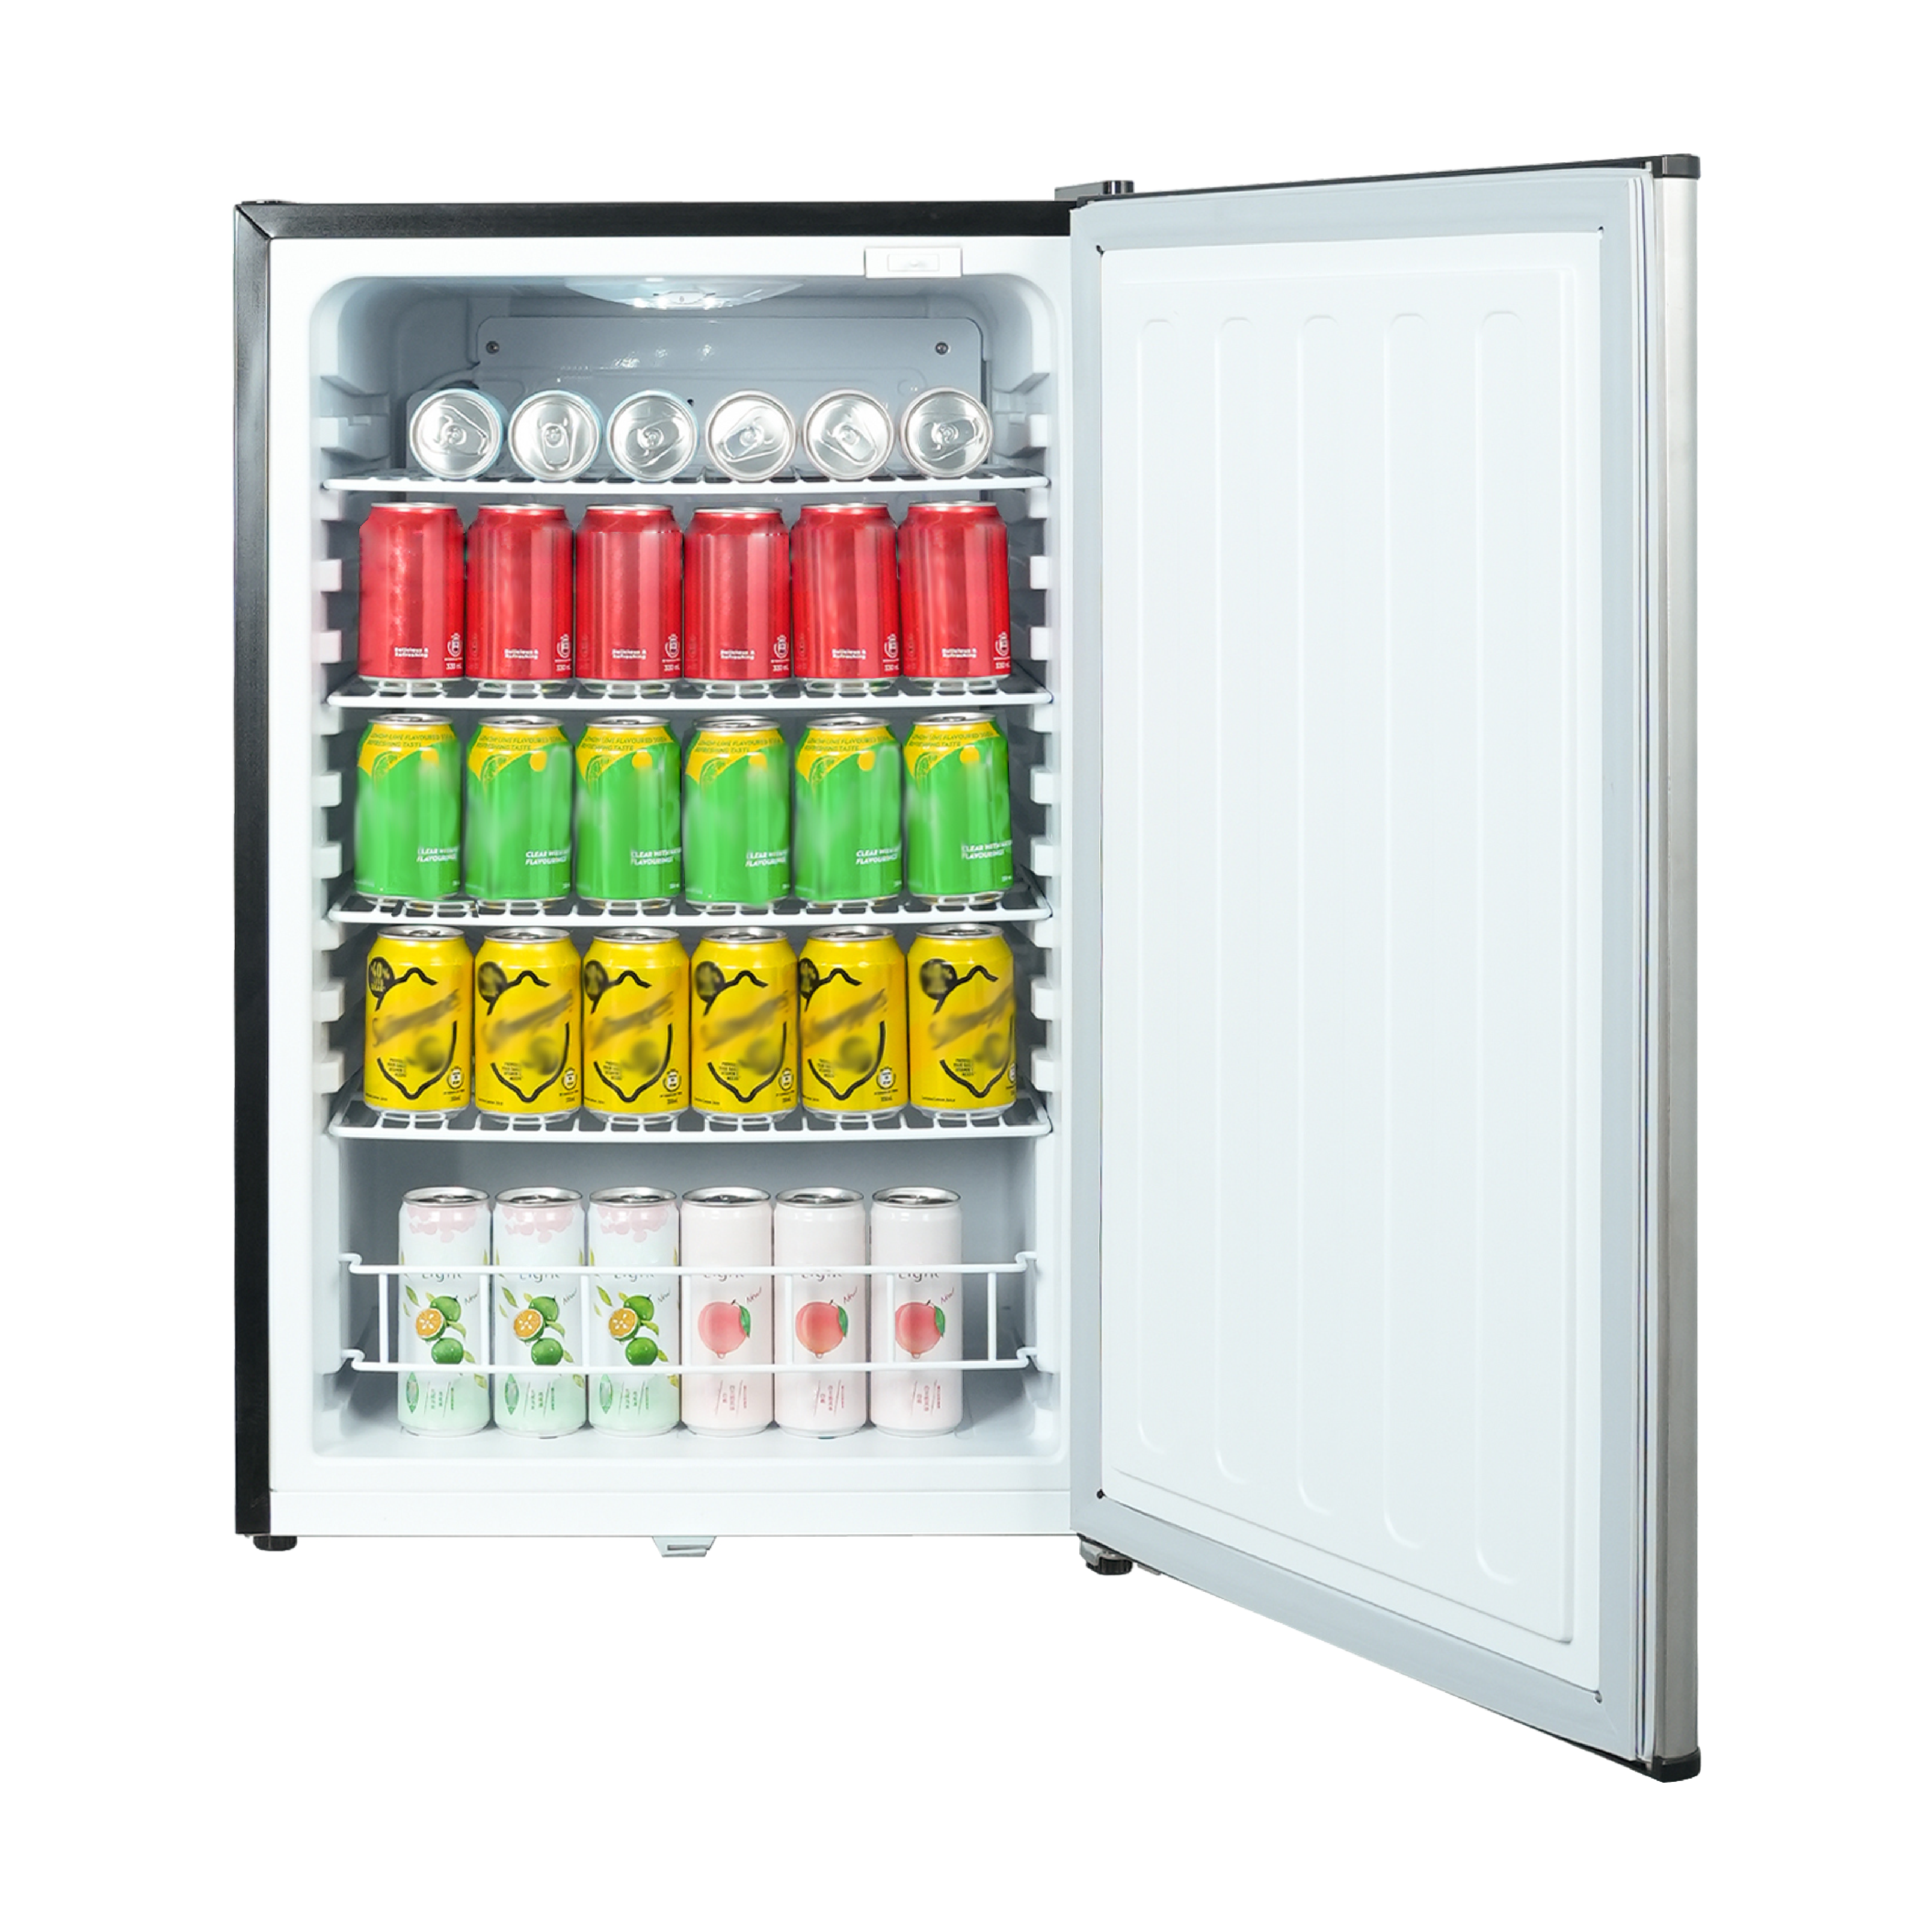 Front view of a 4.1 Cu Ft Stainless Steel Outdoor Beverage Fridge 156 cans with the door open, revealing four shelves and fully stocked with beverage cans